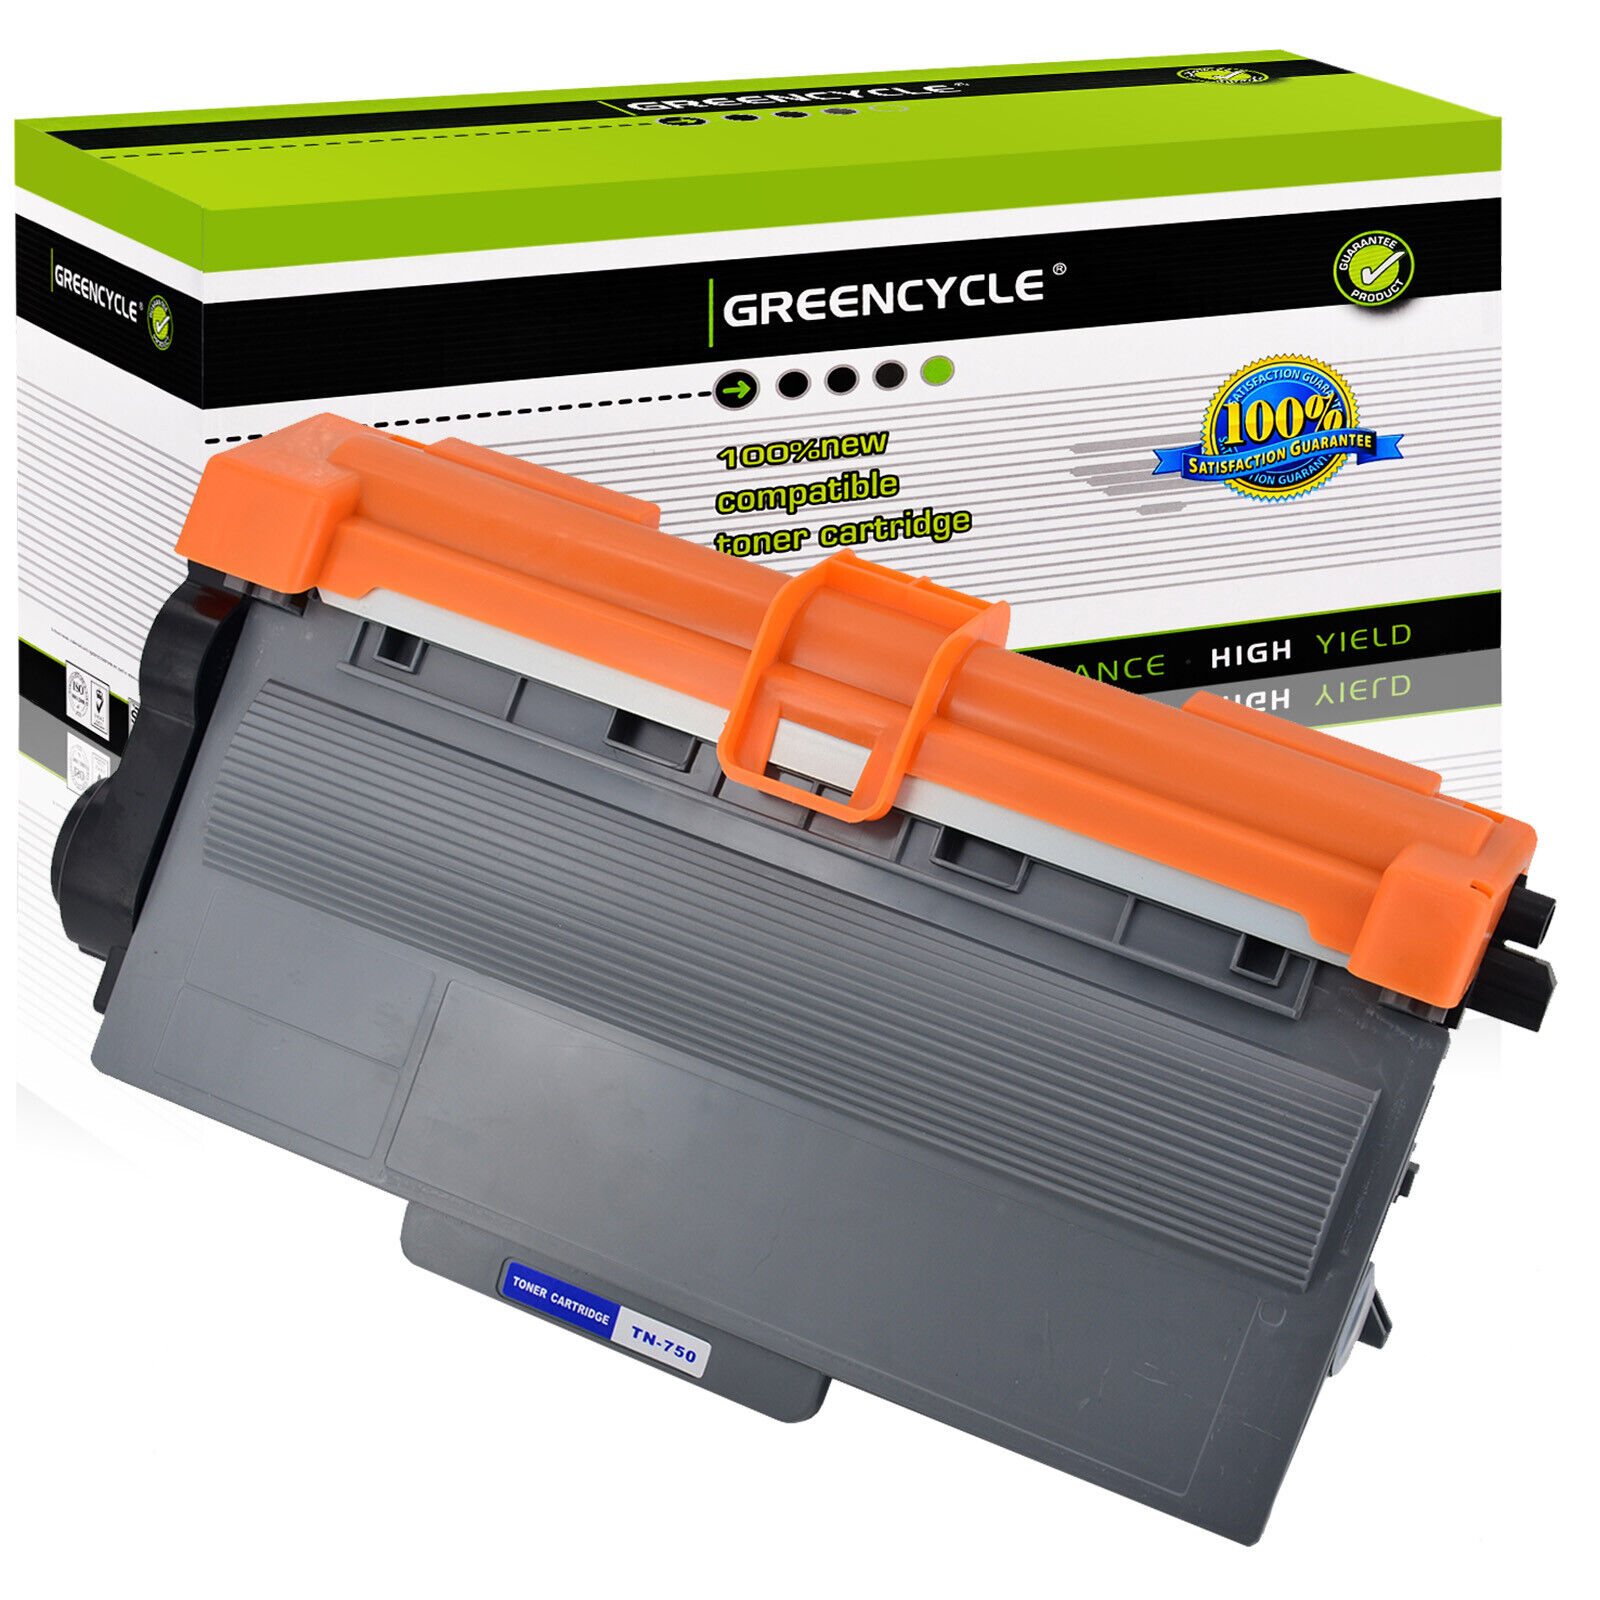 TN750 Black Toner Cartridge Fits for Brother HL-5470DWT DCP-8110DN 8150DN 8155DN